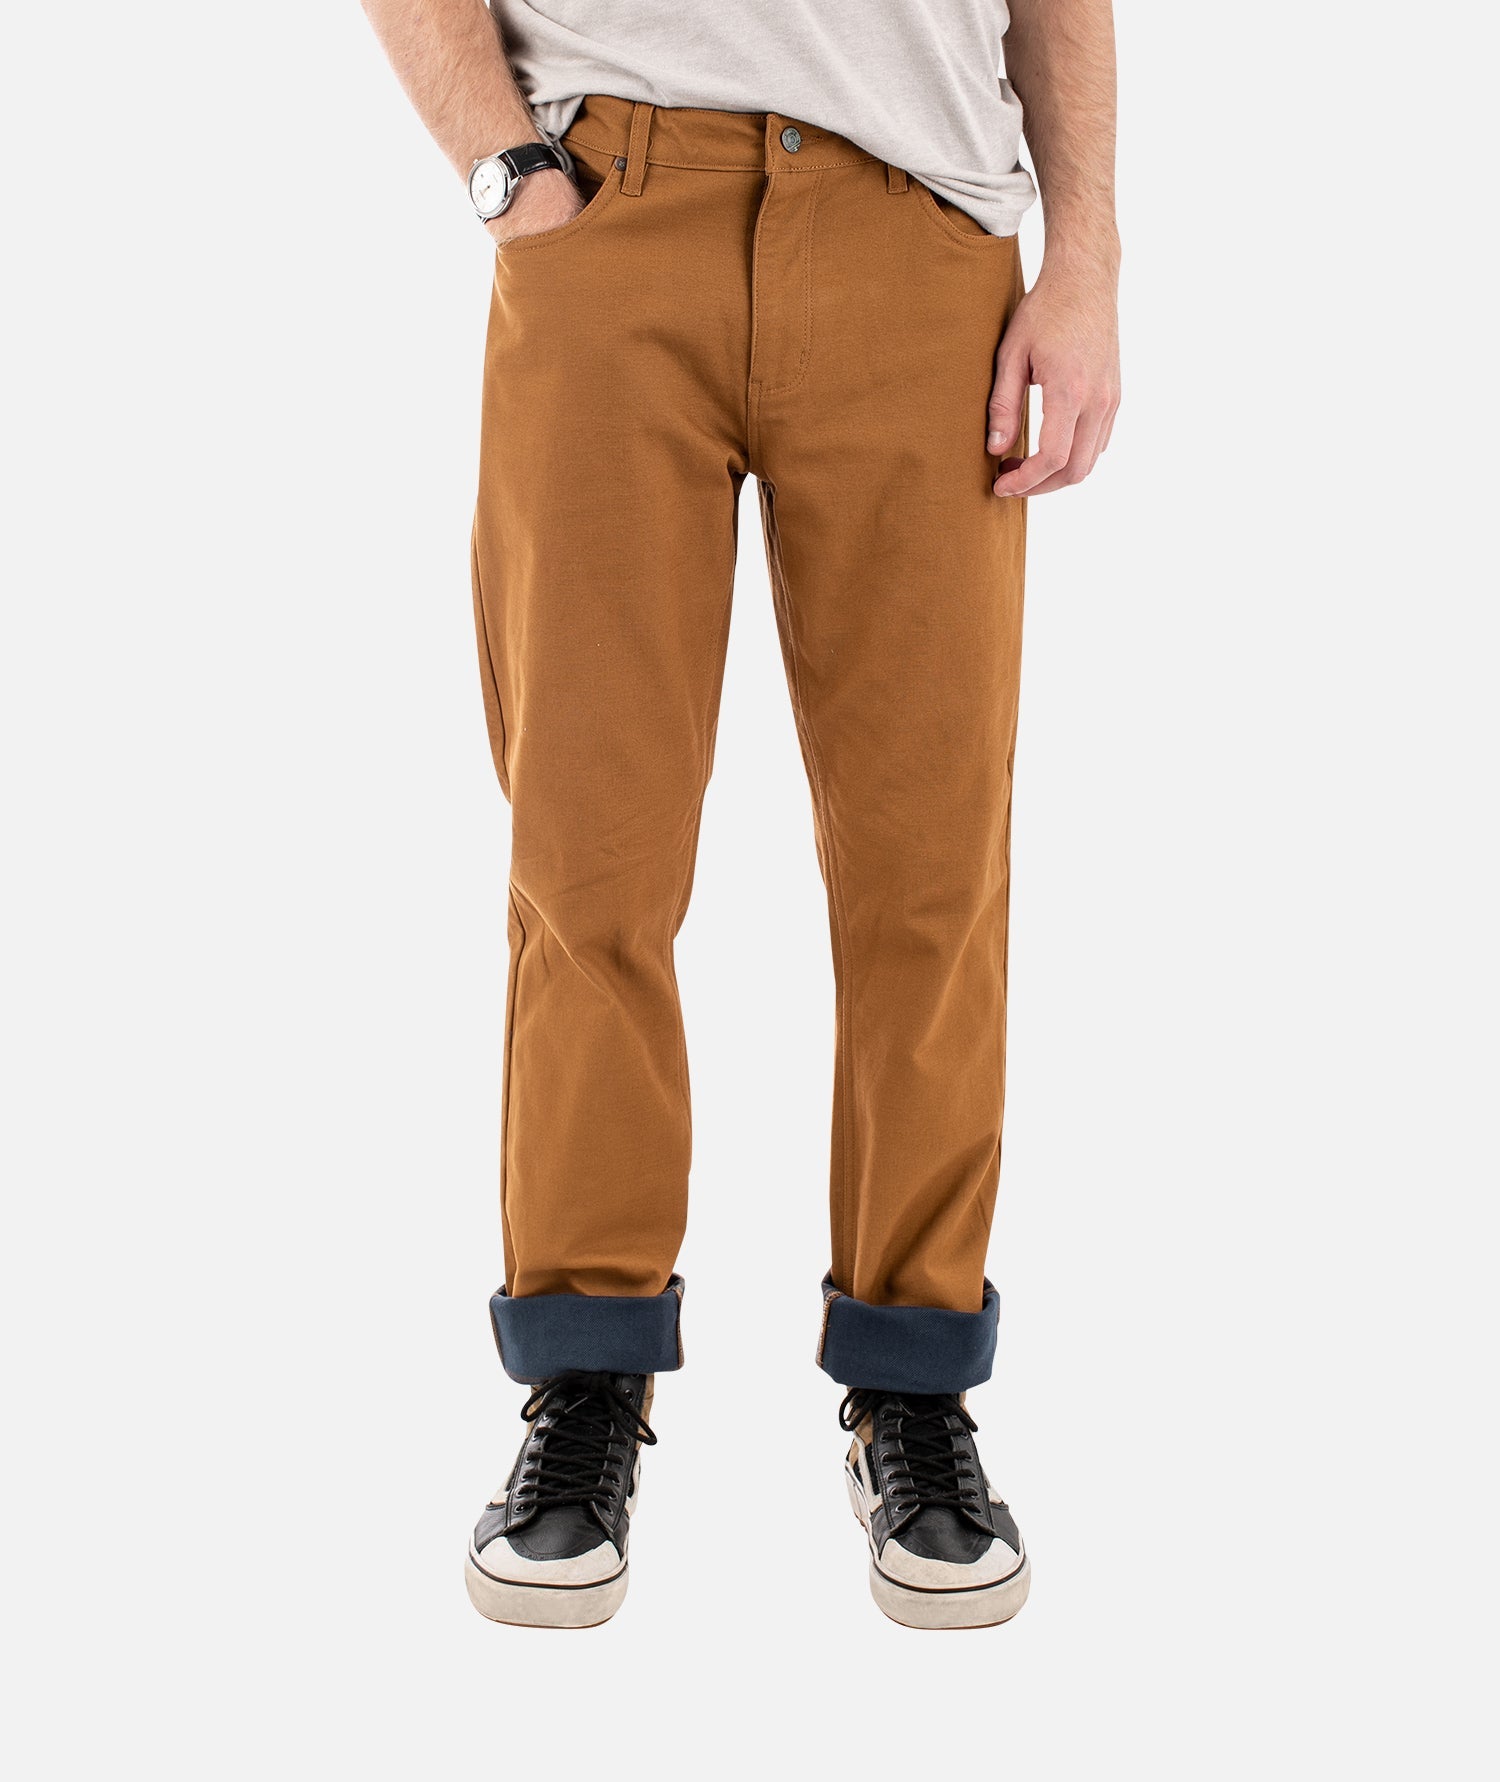 Jetty Mariner Lined Pants - 88 Gear